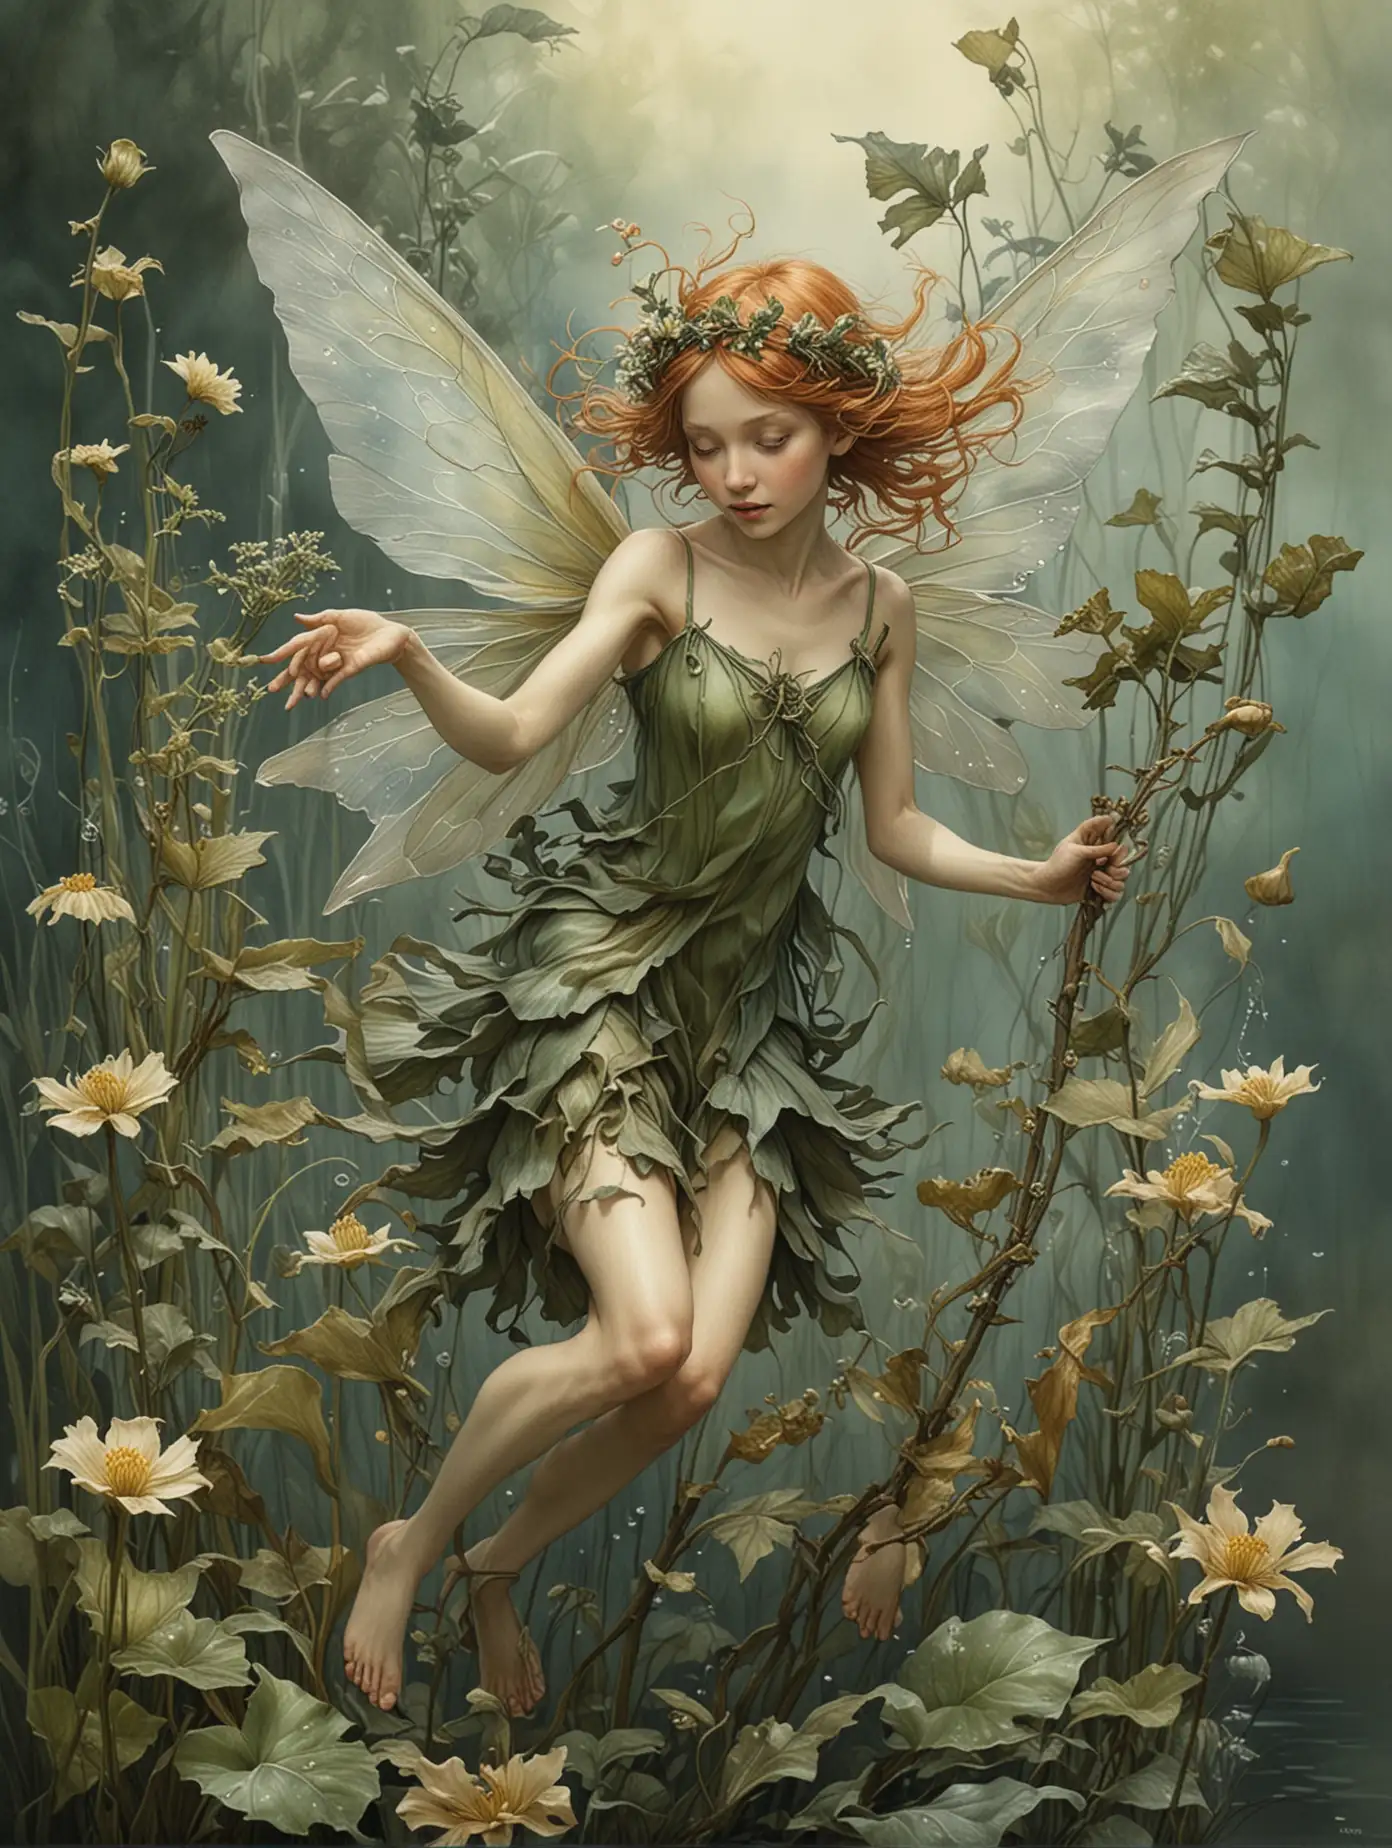 HyperRealistic Flower Fairy Art Kelp Fairy Inspired by Cicely Mary Barker and Brian Froud